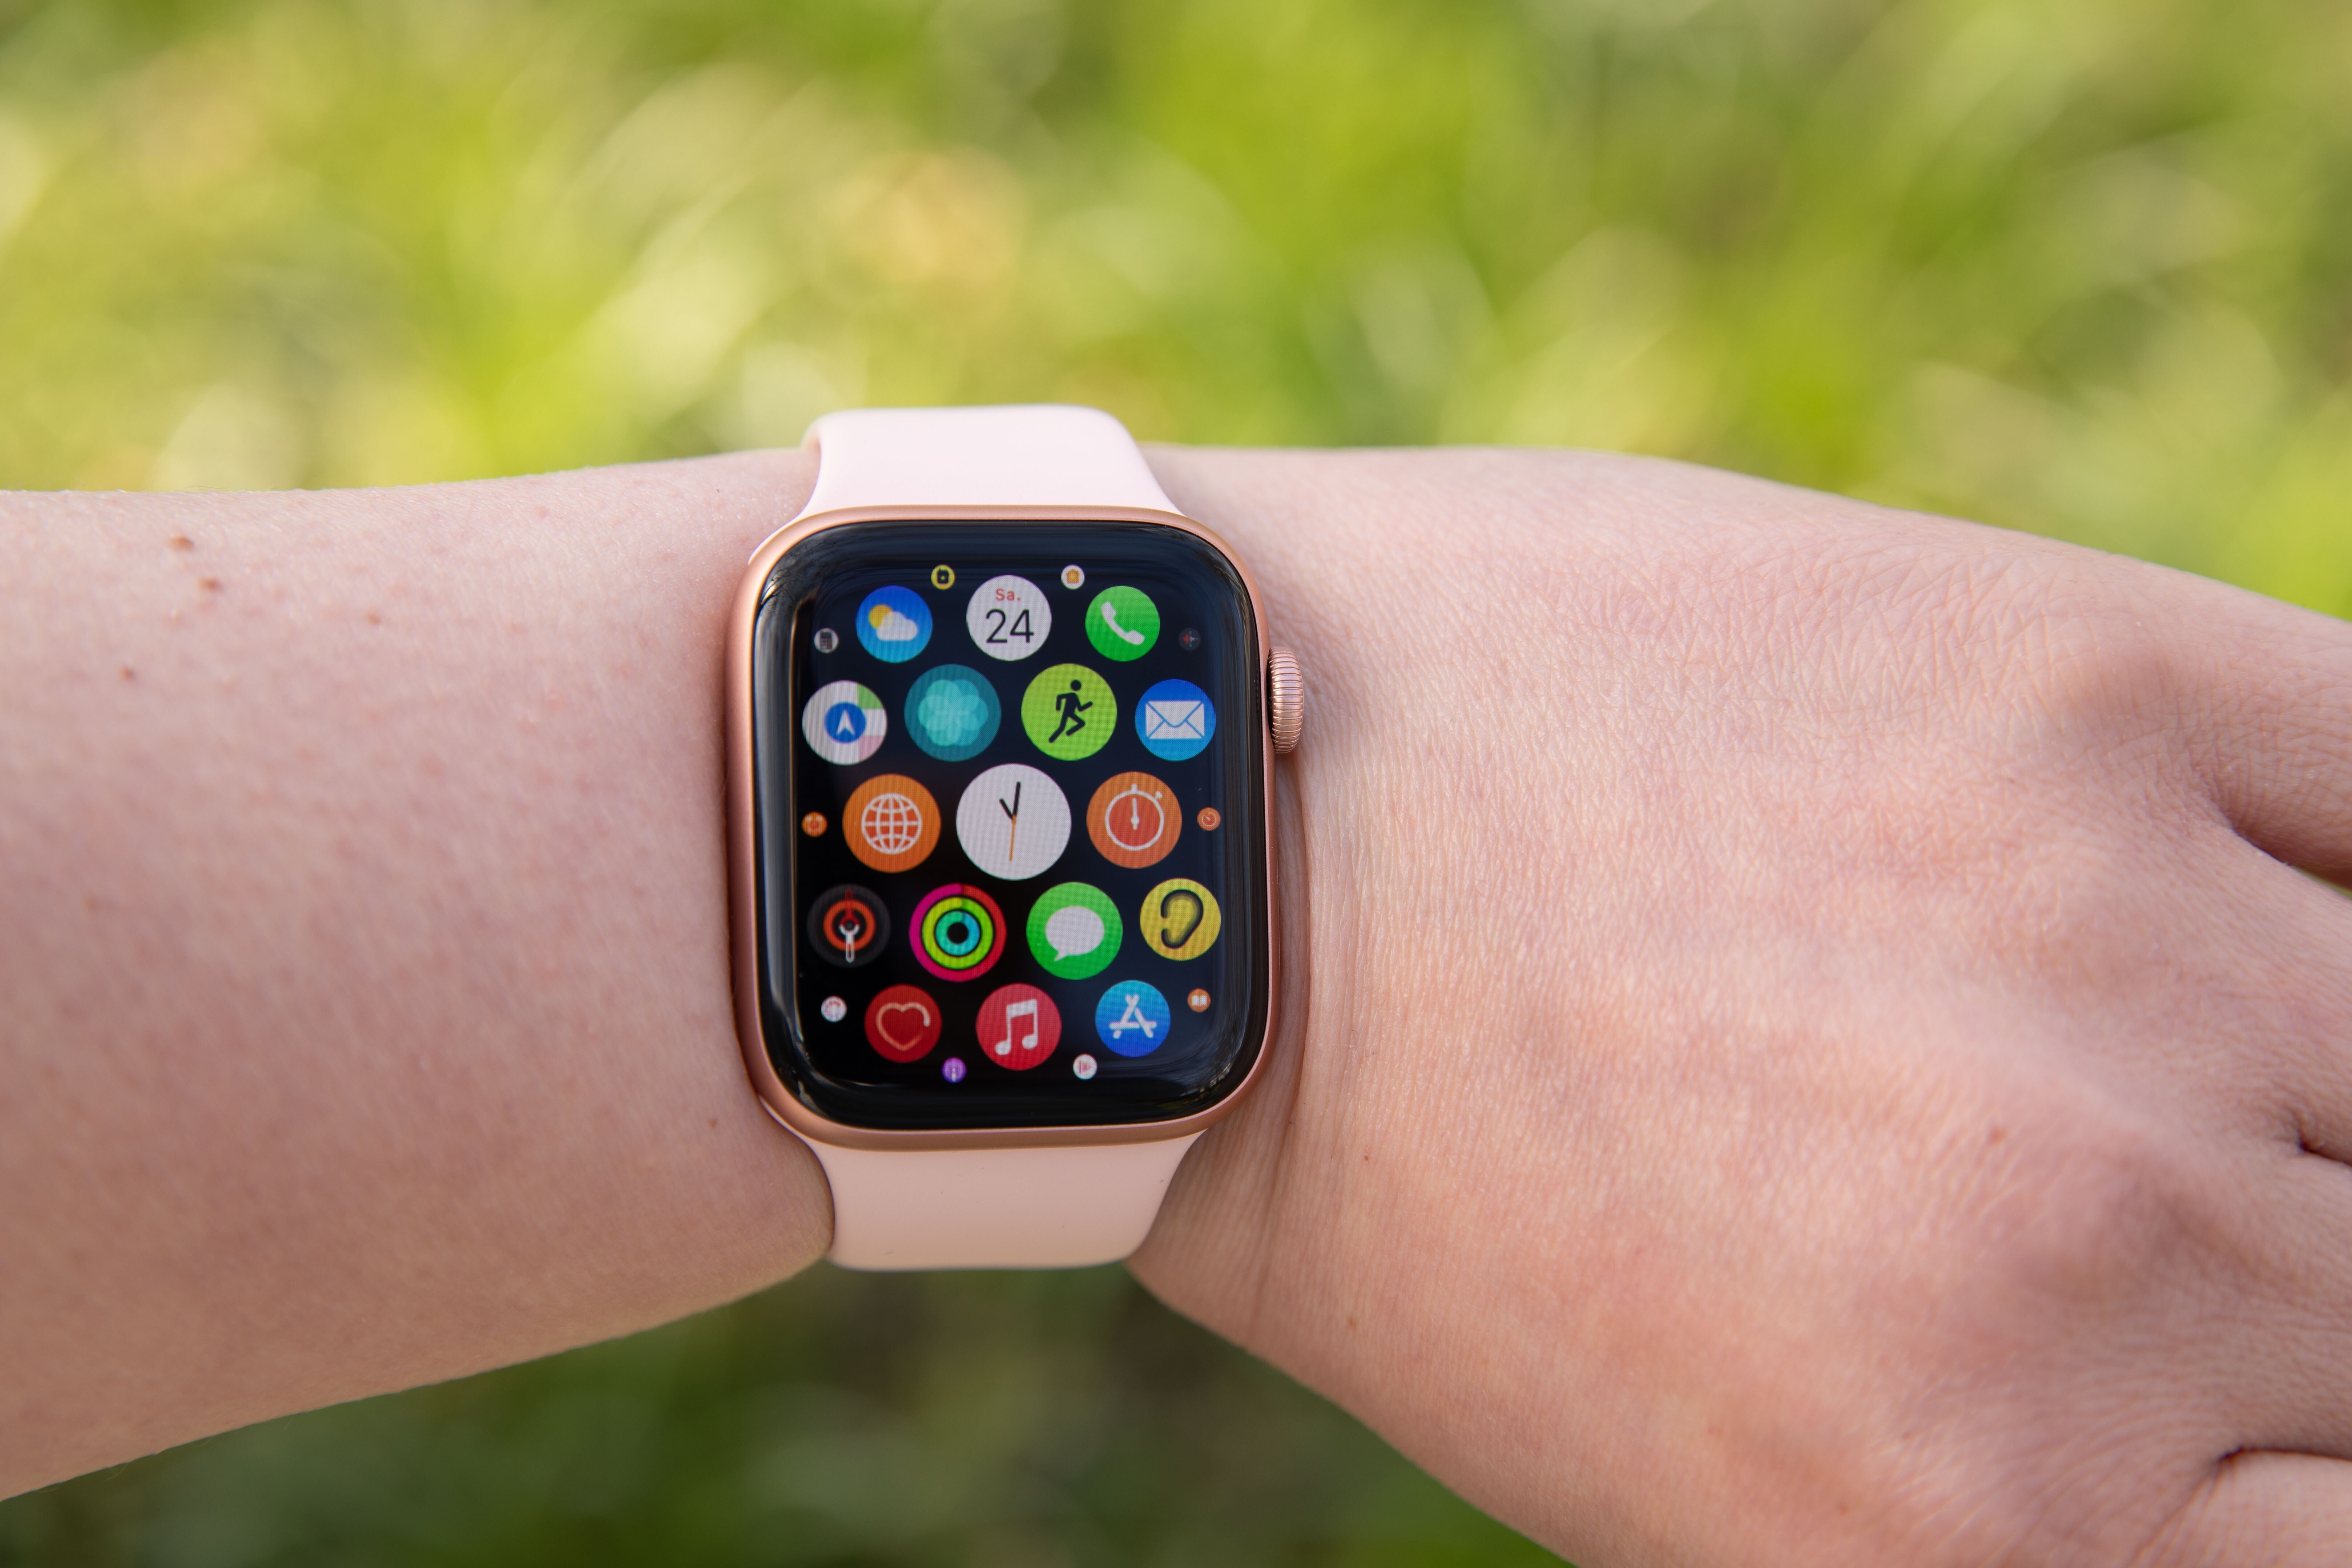 An Apple Watch 5. Future versions of the smartwatch may include sensors to monitor blood pressure and blood sugar and alcohol levels. Photo: Katja Knupper/Die Fotowerft/DeFodi Images via Getty Images